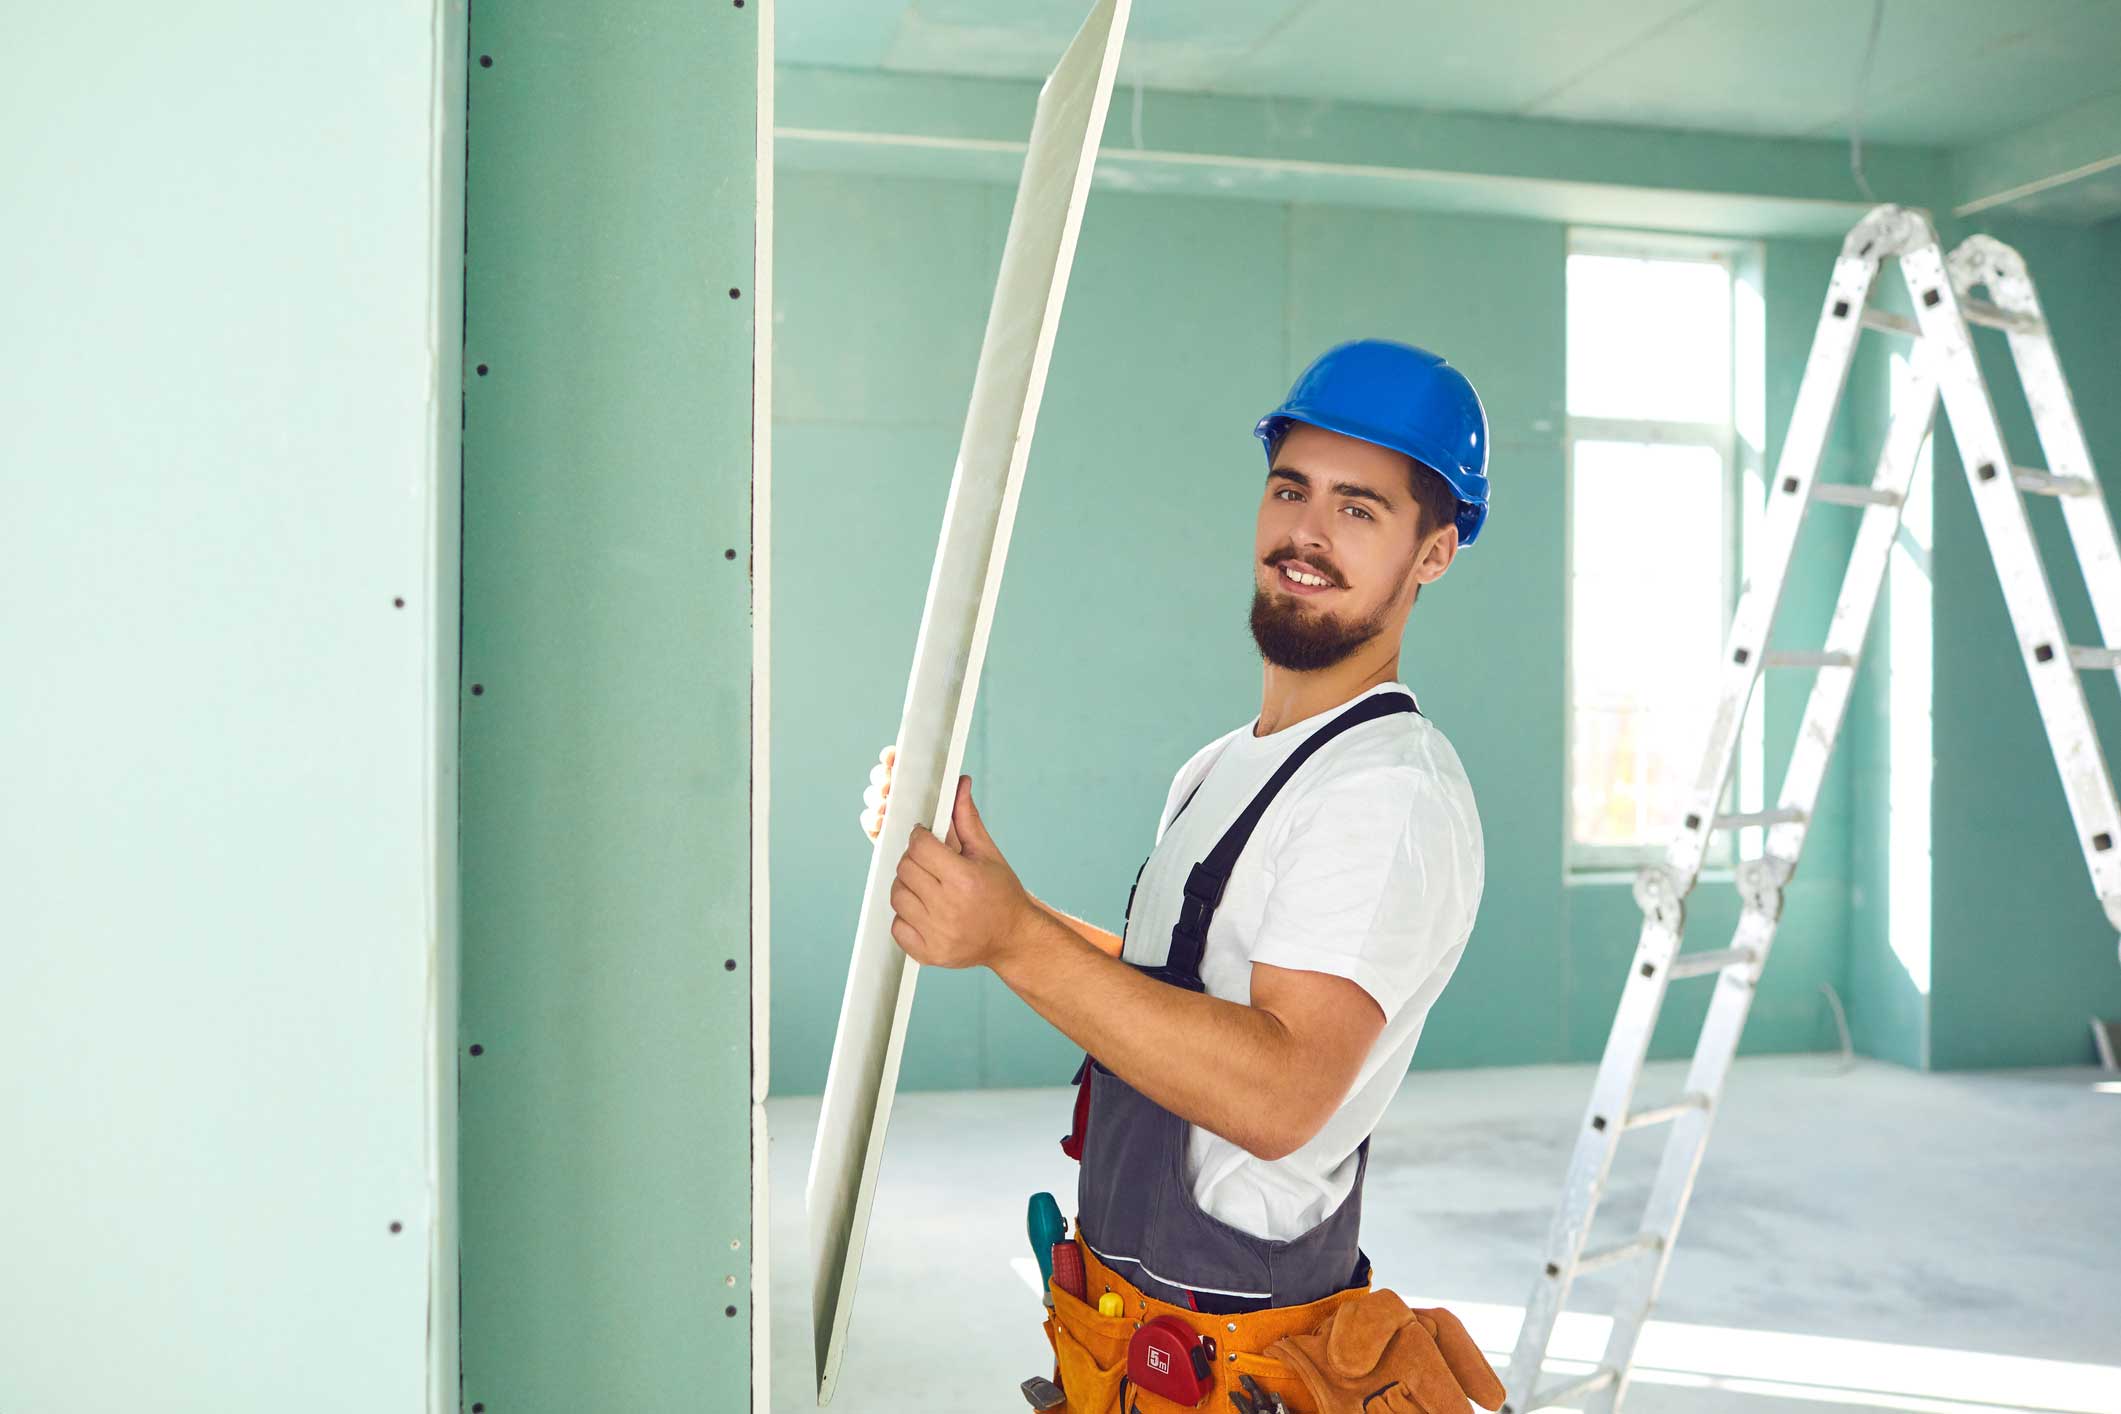 Drywall Contractor